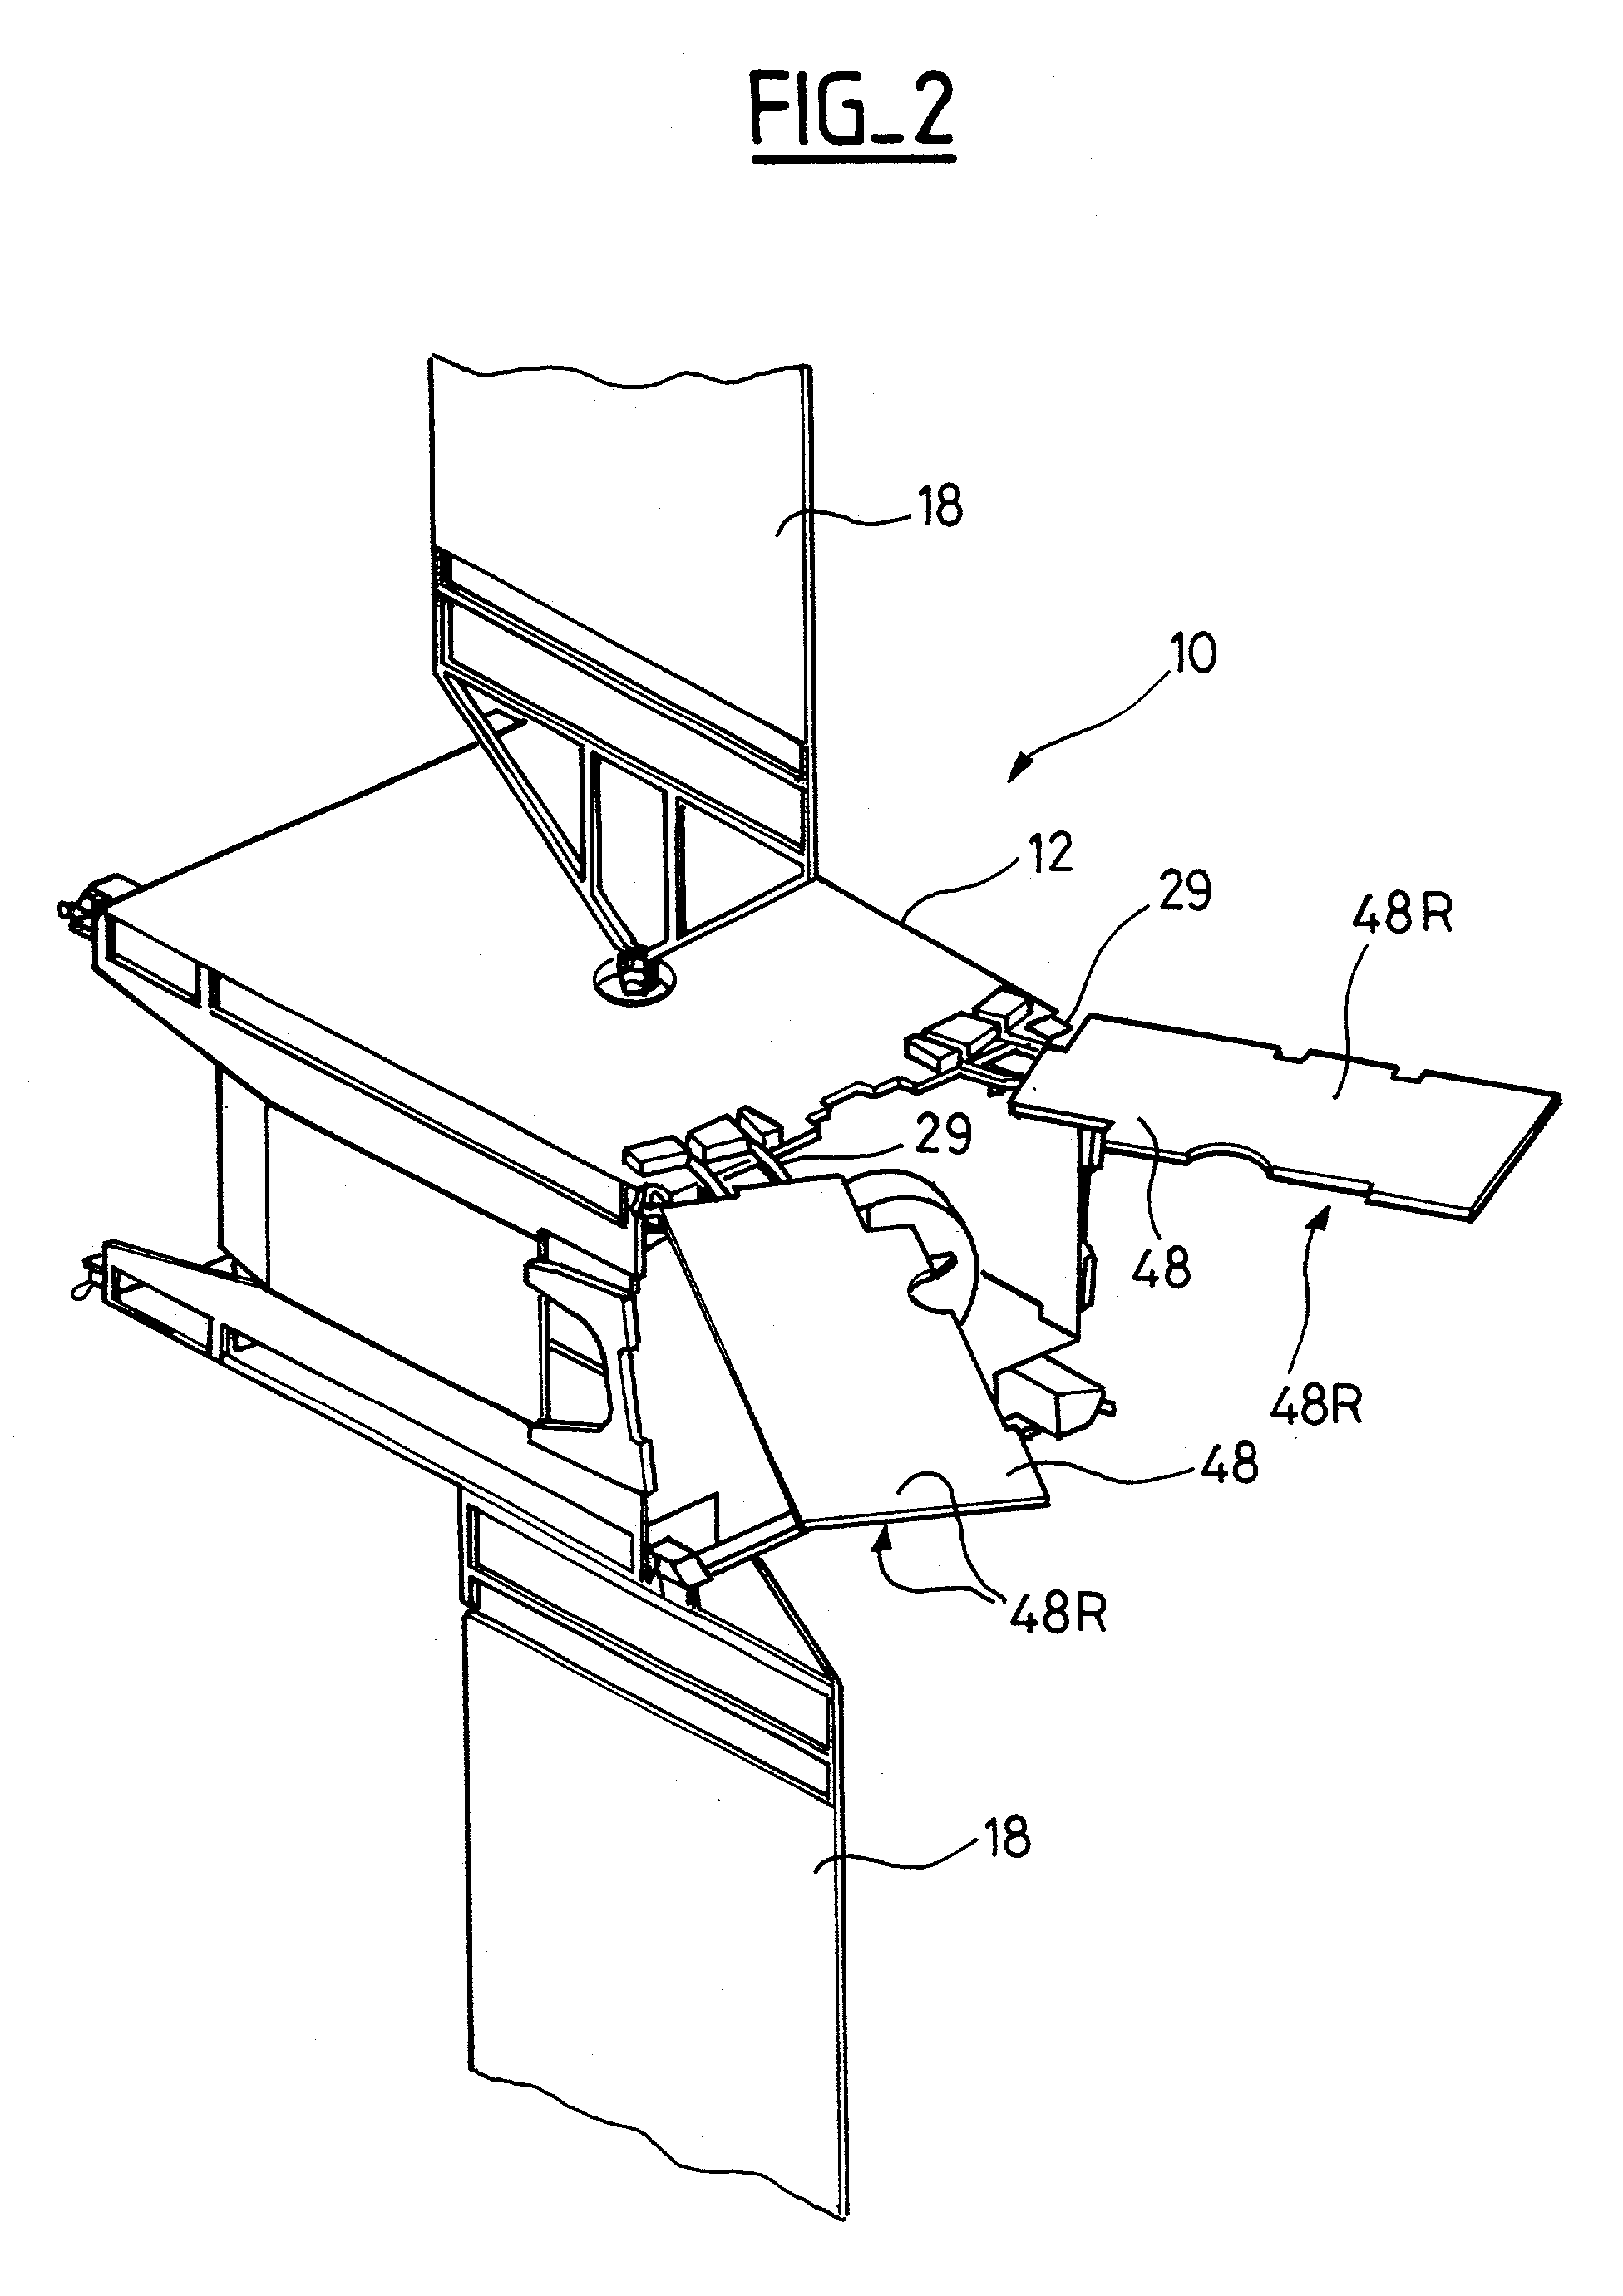 Deployable radiator for a space vehicle